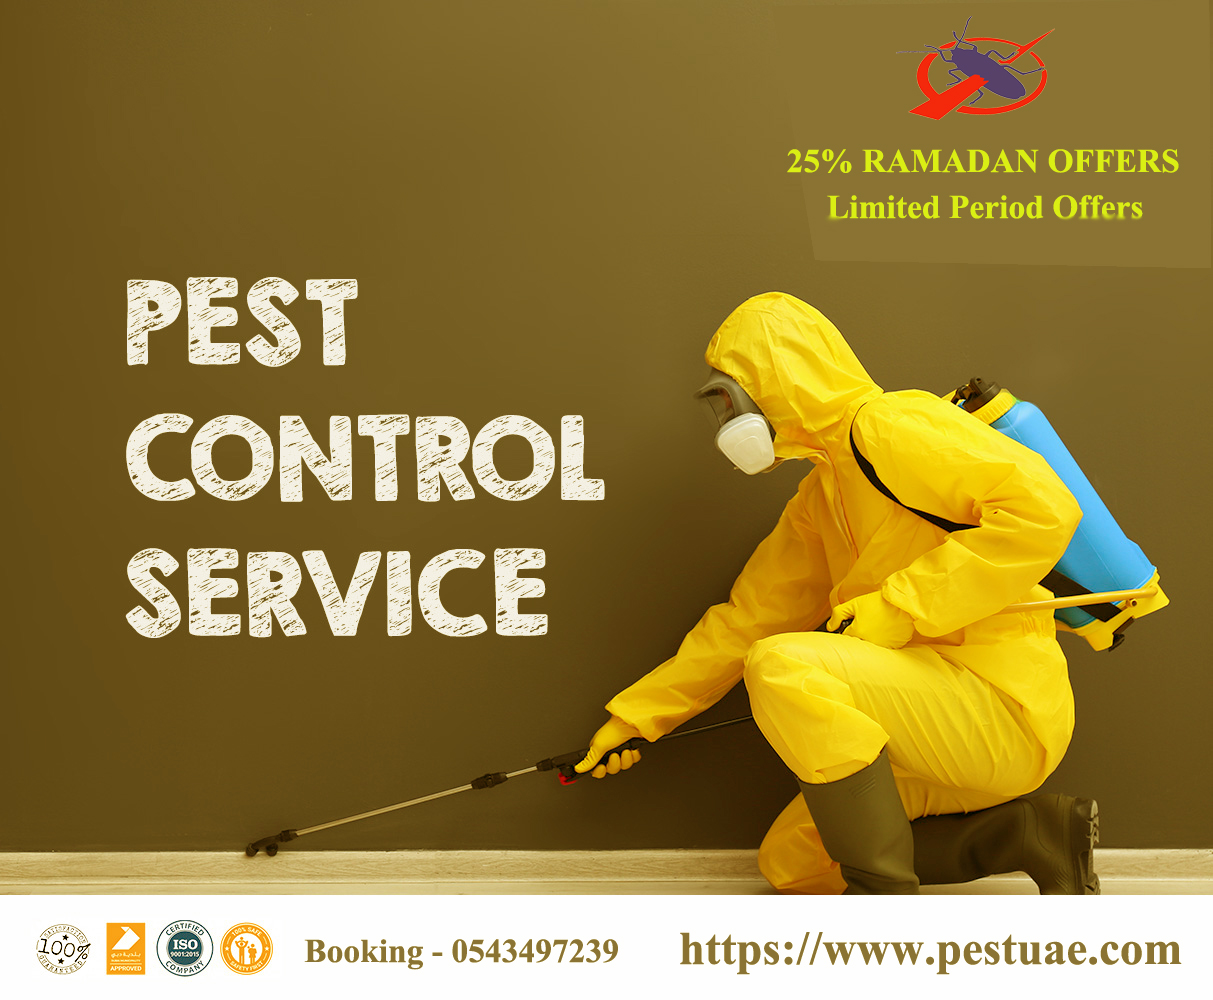 # Pest Control – Best Deals Only This Week